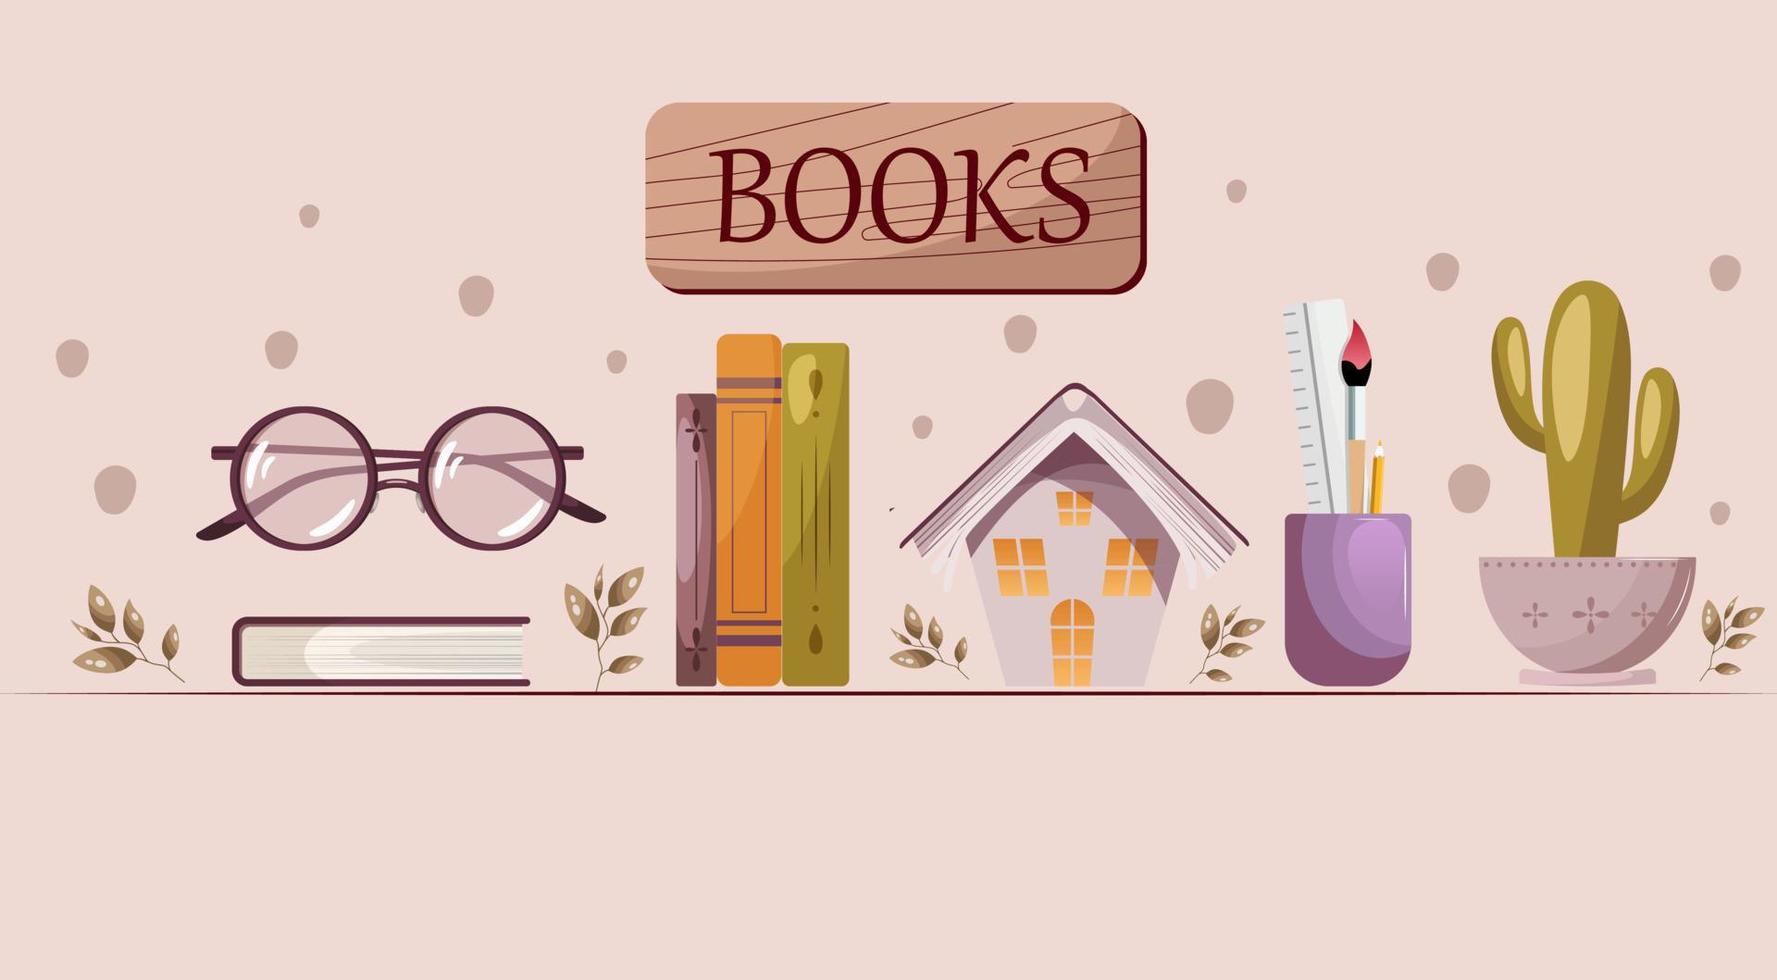 Bookshelve with books, decorative house, potted plant. Bookstore, bookshop, book lover concept. Isolated Vector illustration.